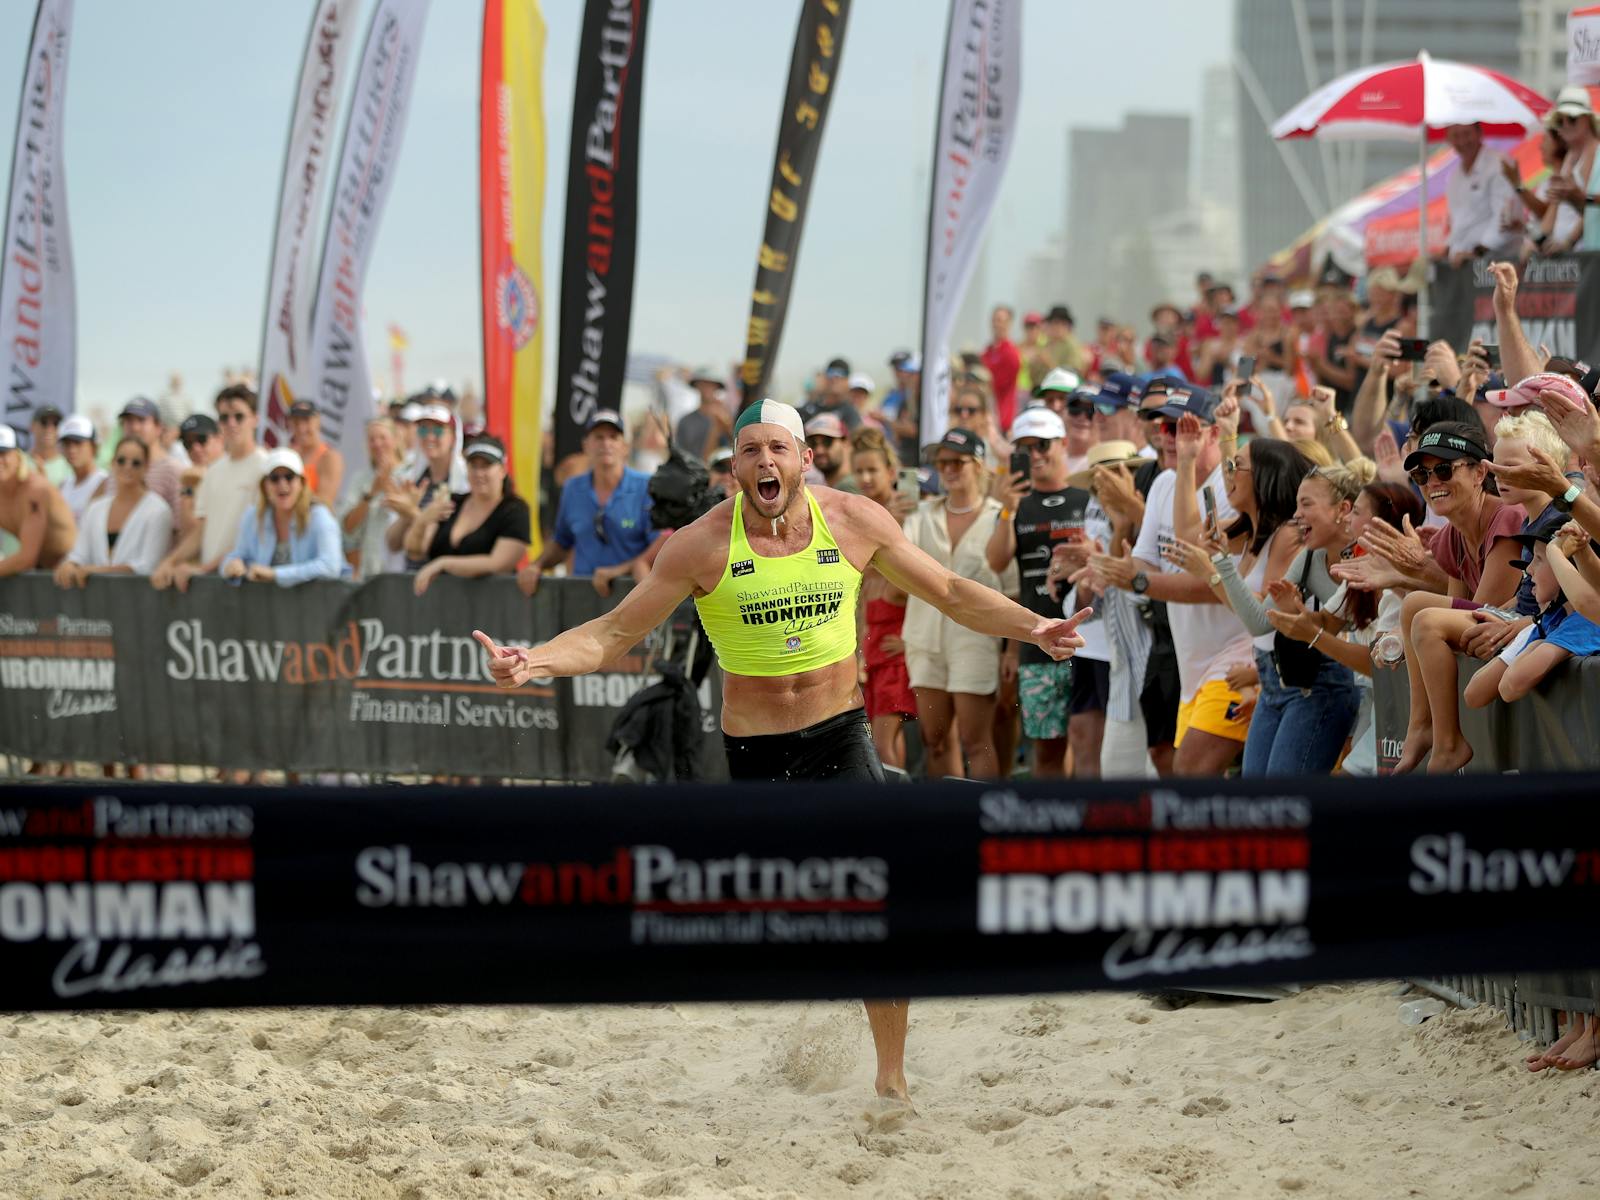 Image for Shaw and Partners Shannon Eckstein Ironman Classic